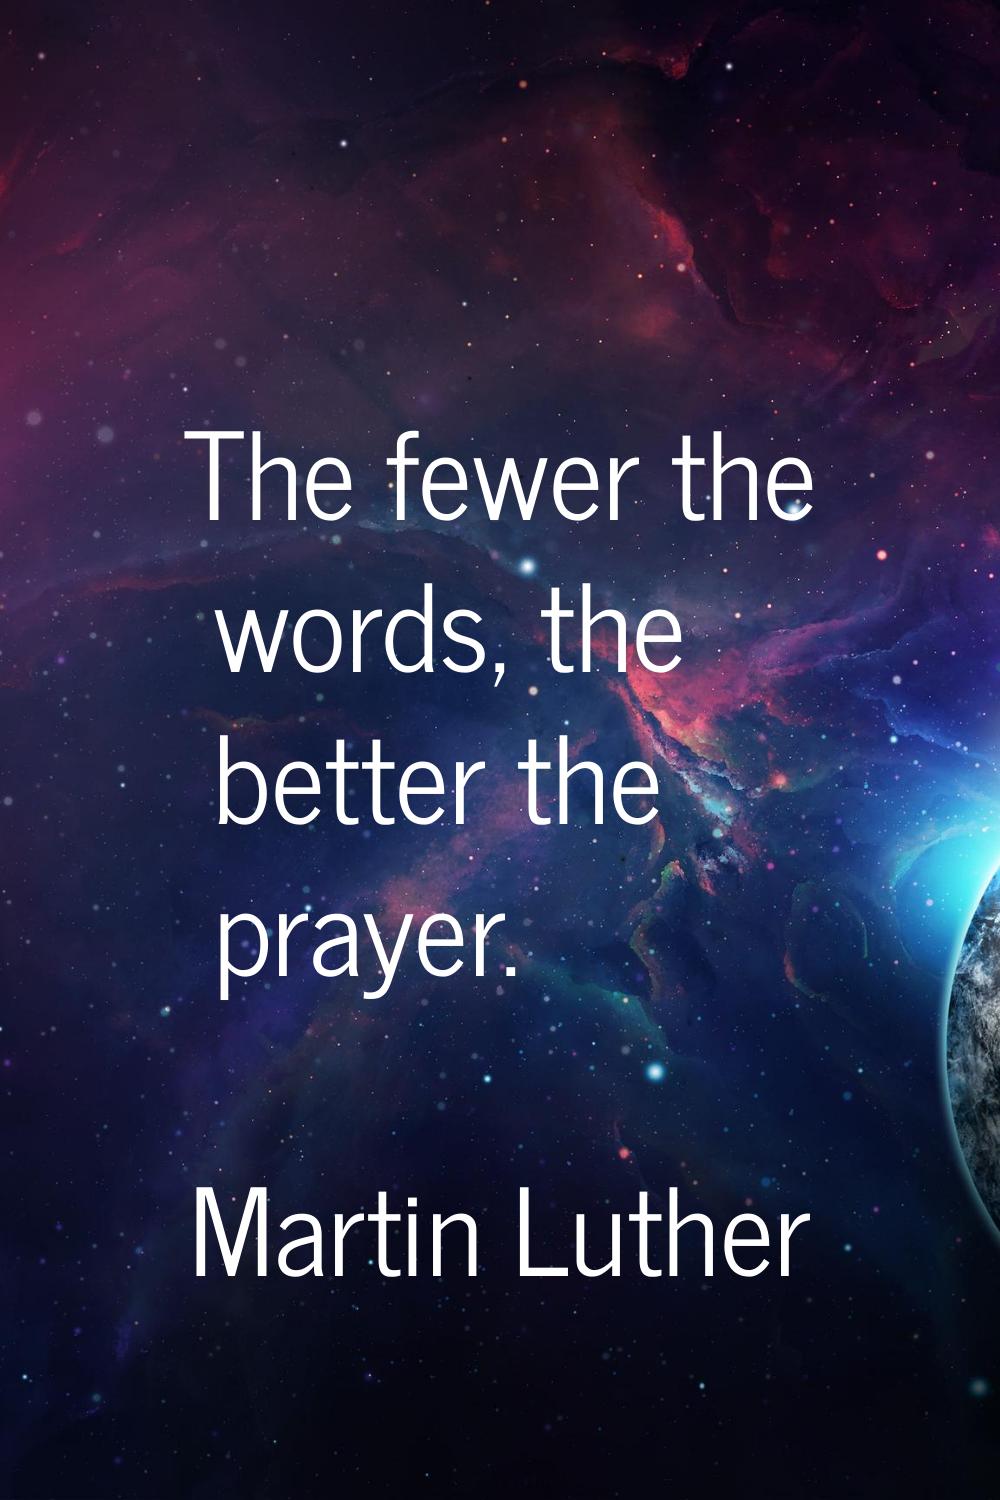 The fewer the words, the better the prayer.